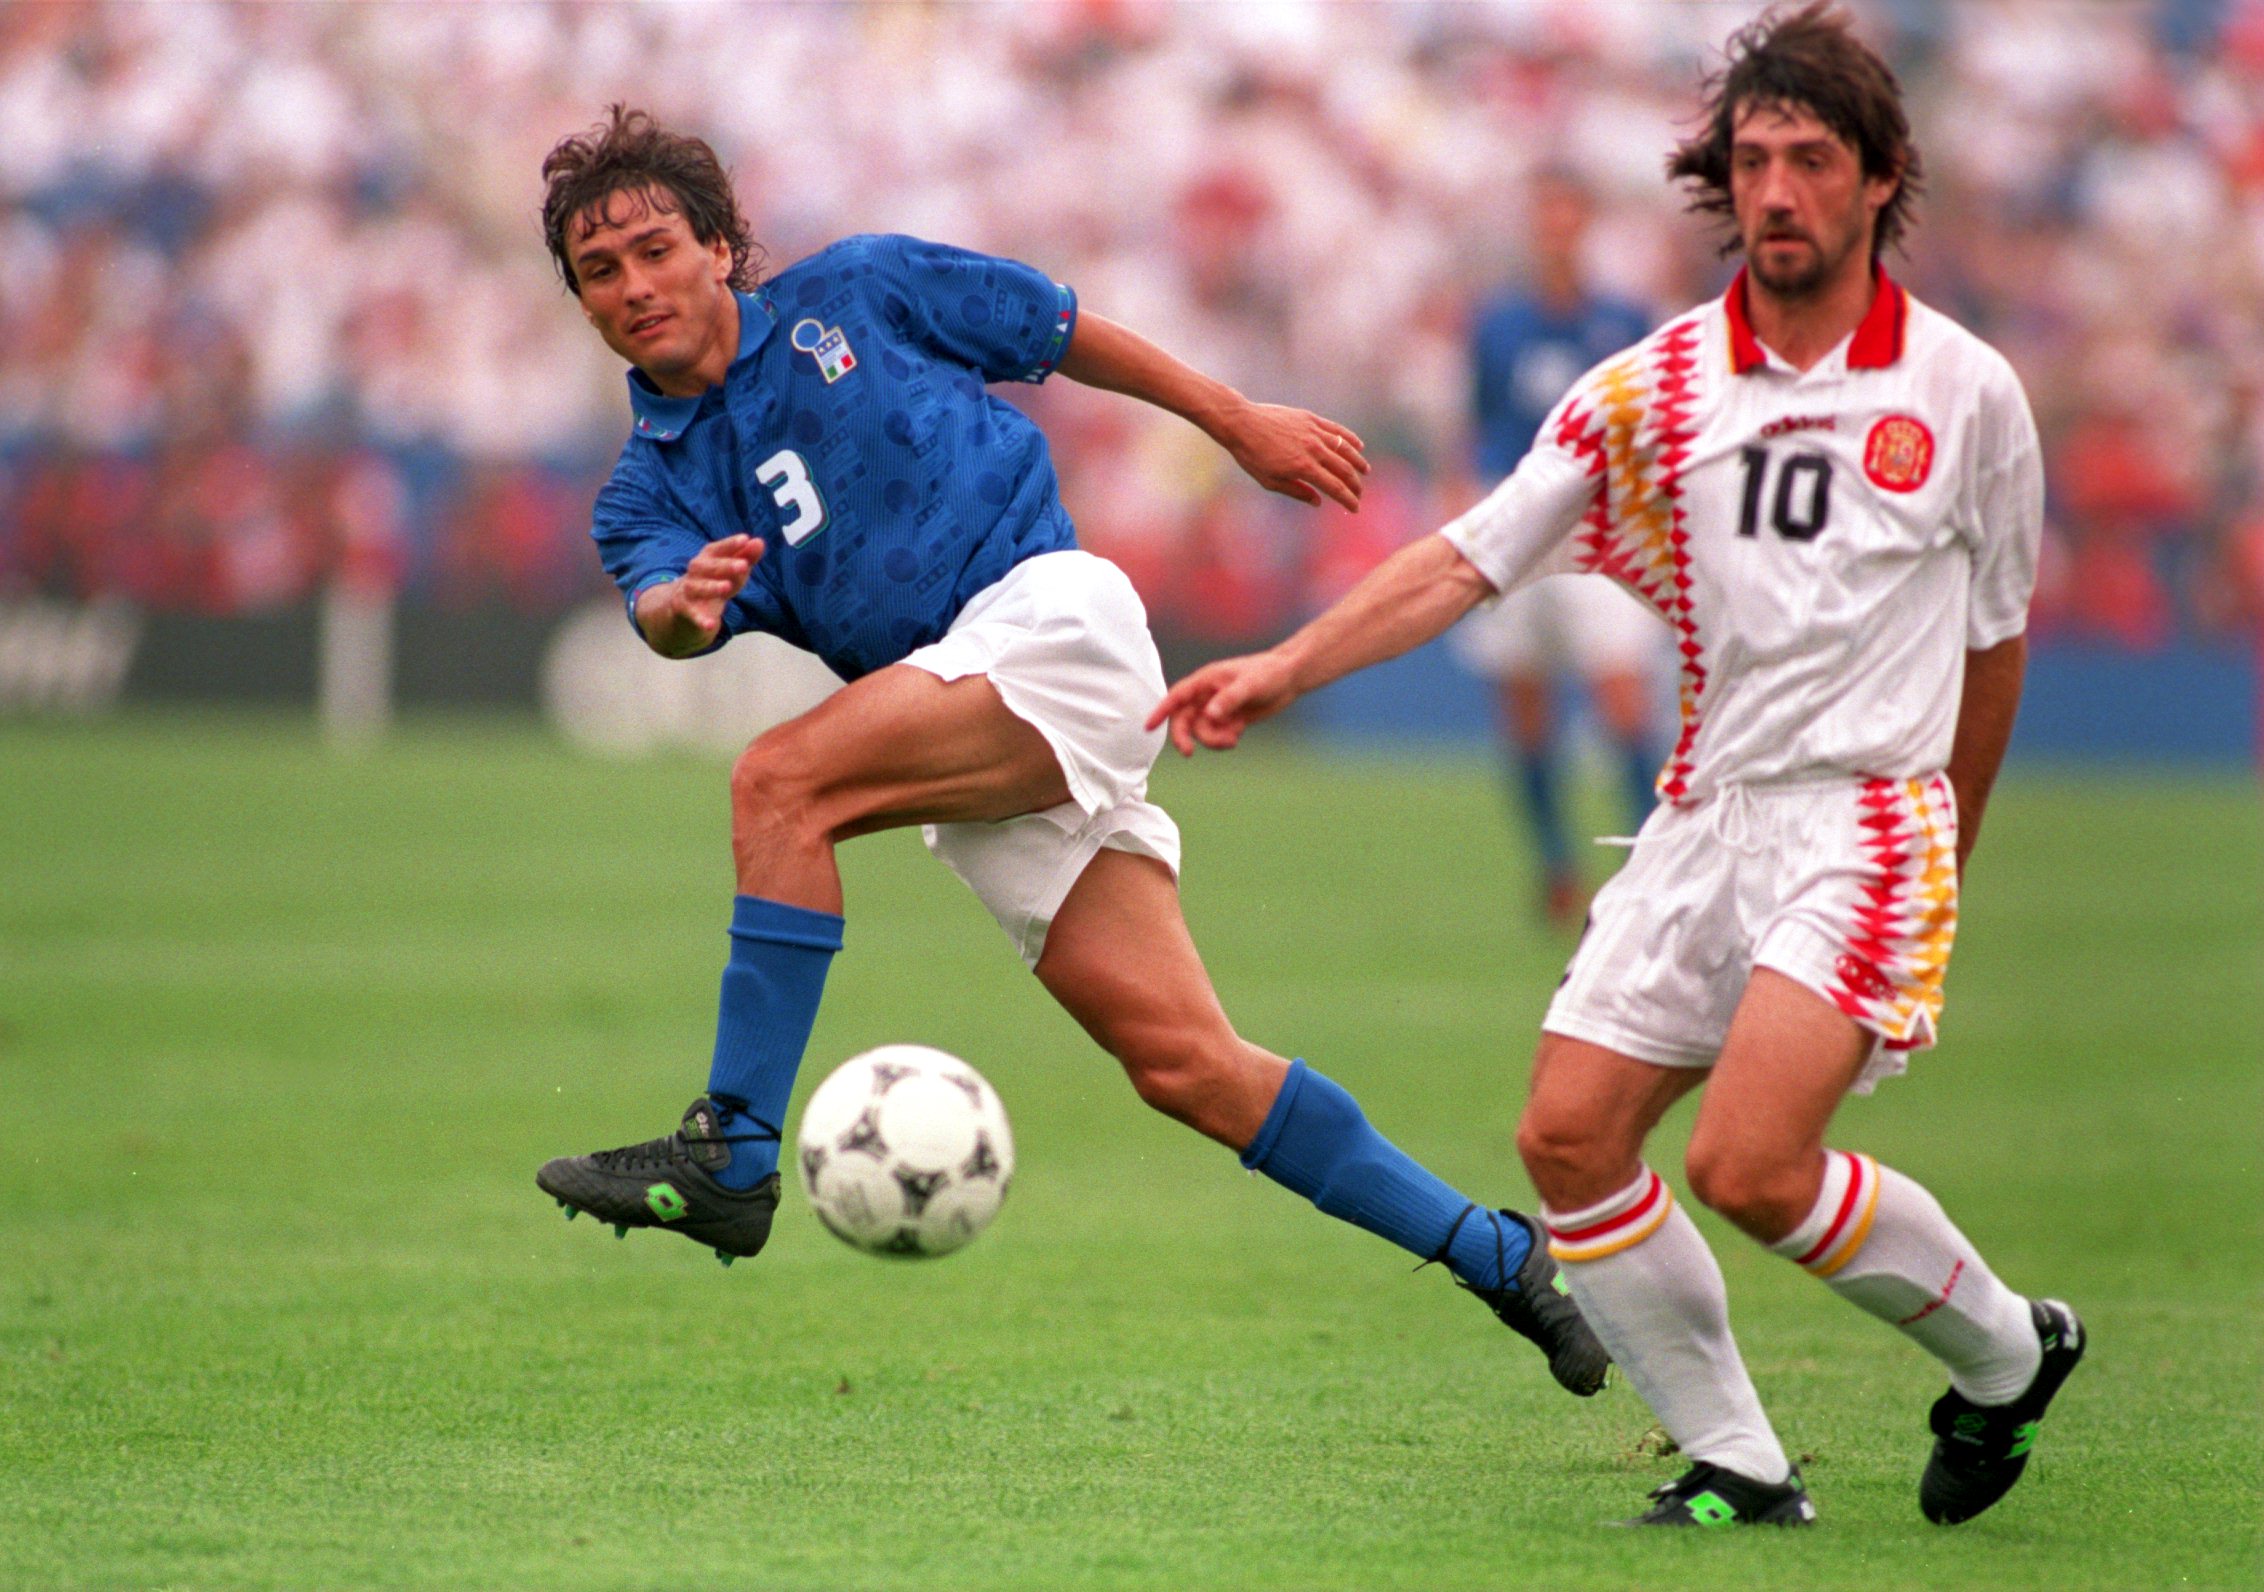 Italy's Antonio Benarrivo and Spain's Jose Maria Bakero in action at the 1994 World Cup.